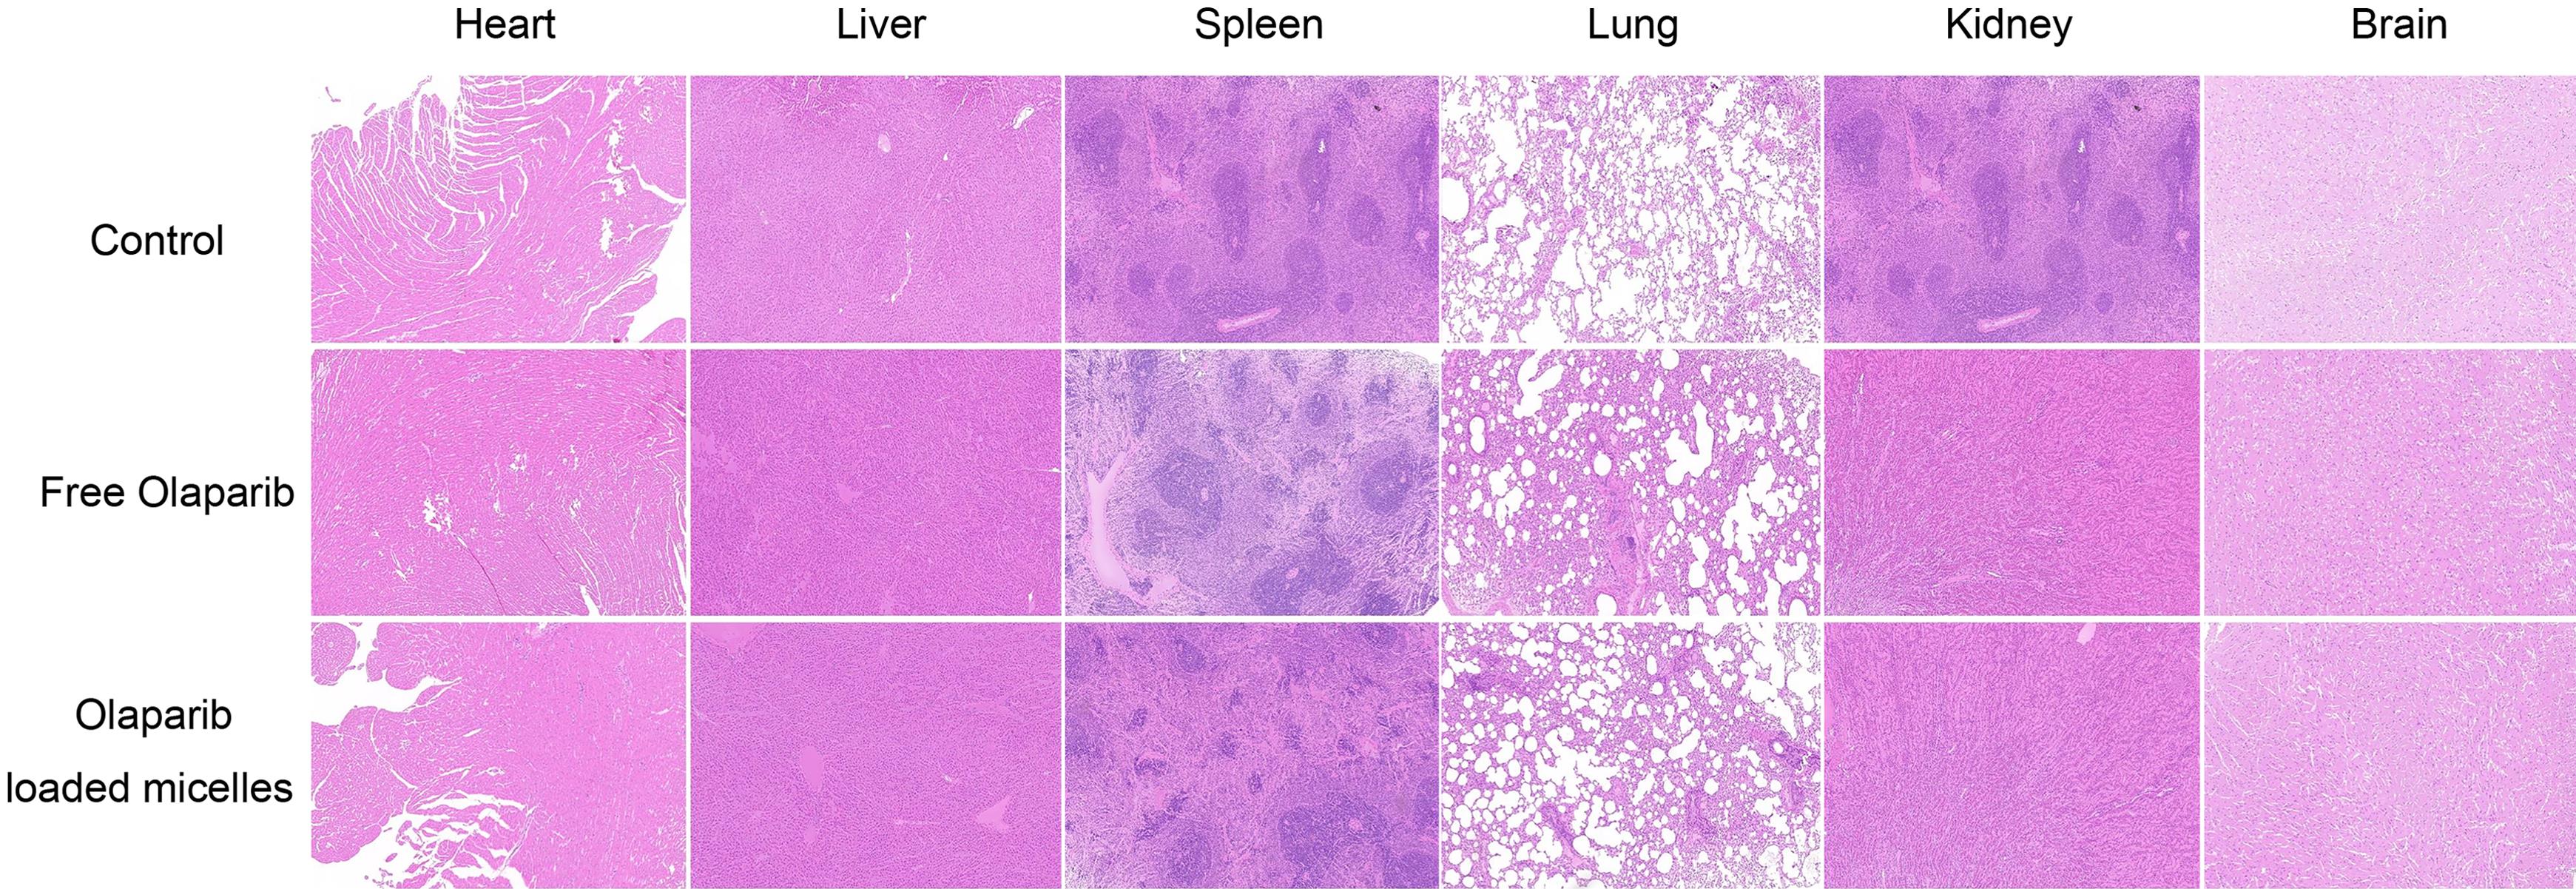 Evaluation of side effects: H&E staining of the heart, liver, spleen, lung, kidneys and brain obtained from rats treated with PBS (control), free olaparib, and olaparib-loaded micelles (initial polymer concentration of 30 mg/mL, magnification: ×200).